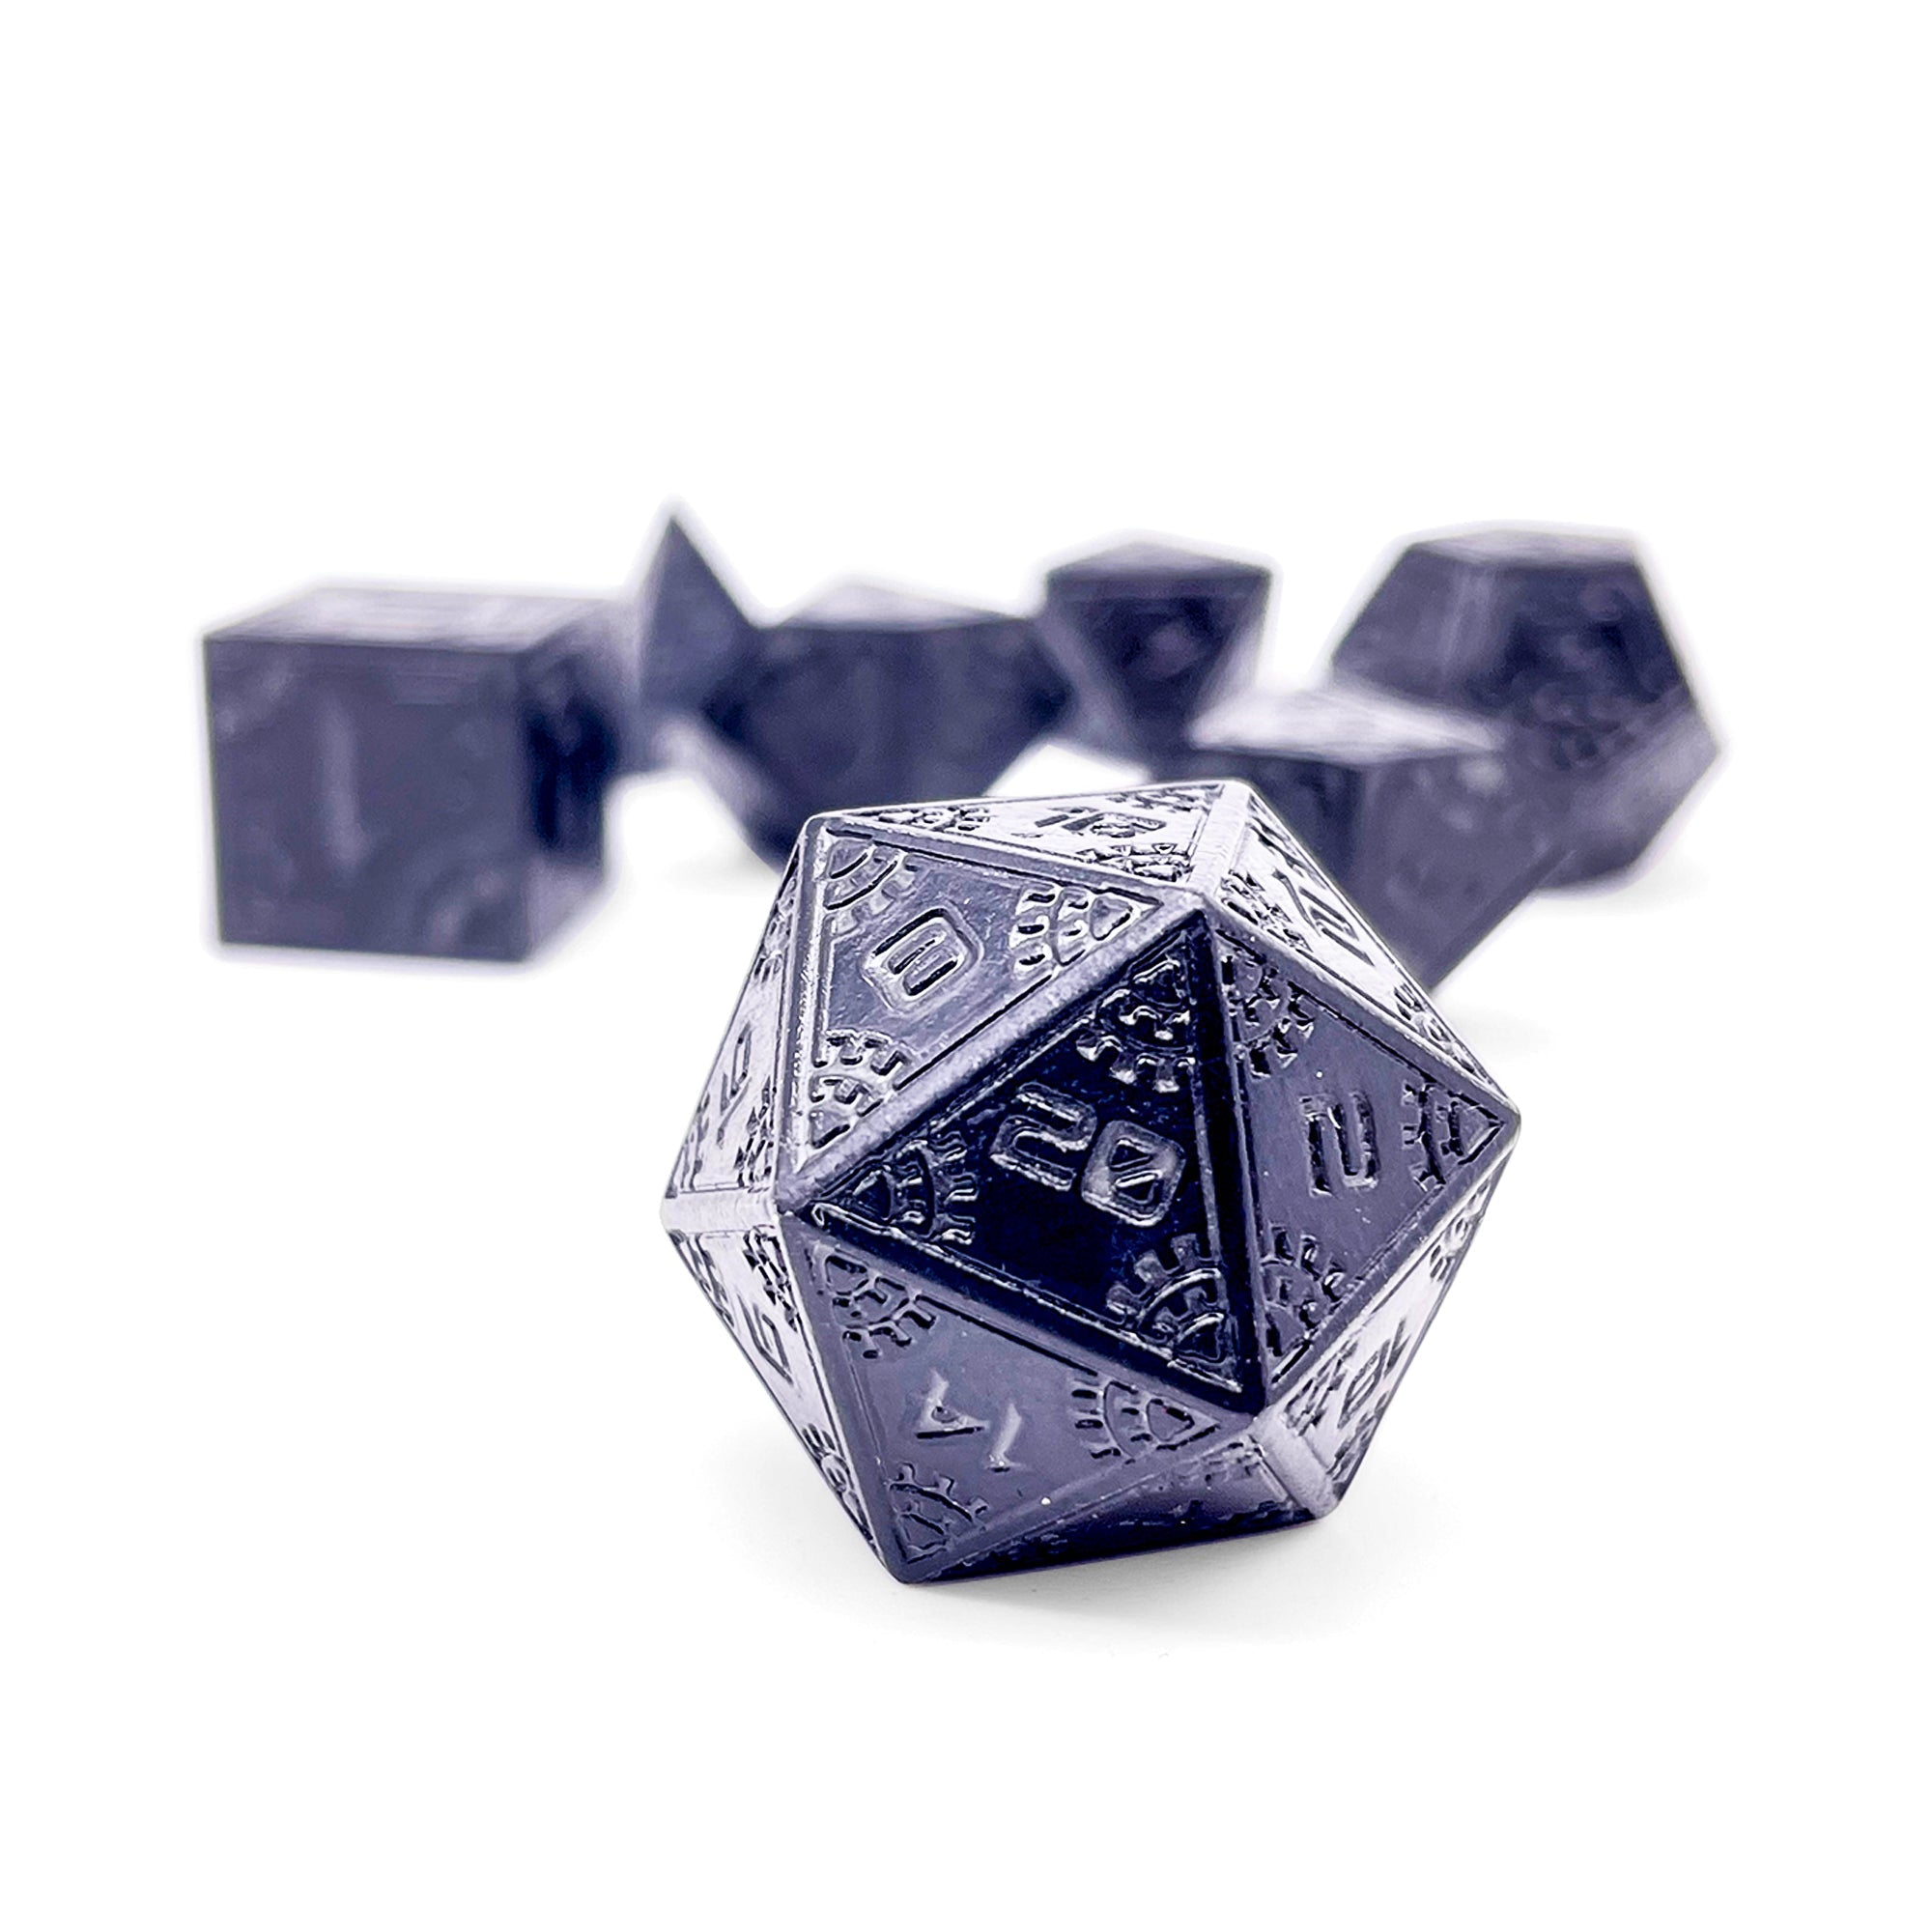 Black Hole - Space Dice 7 Piece RPG Set | Glows in the Dark - NOR 00305